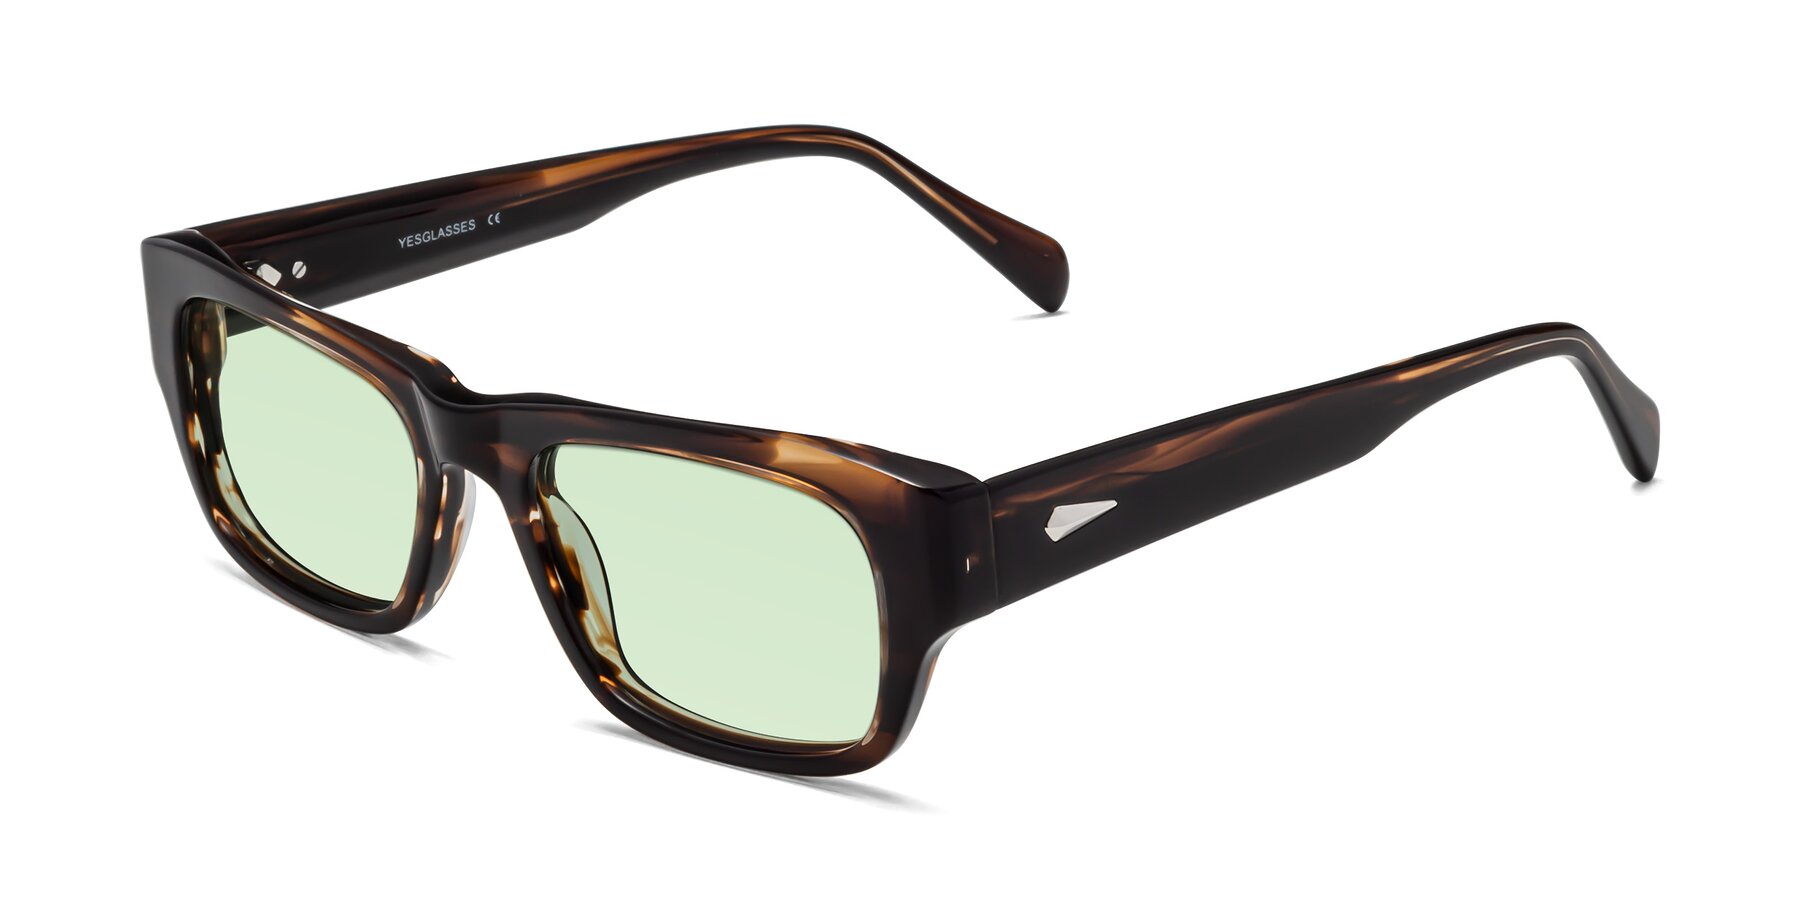 Angle of 1537 in Stripe Brown with Light Green Tinted Lenses